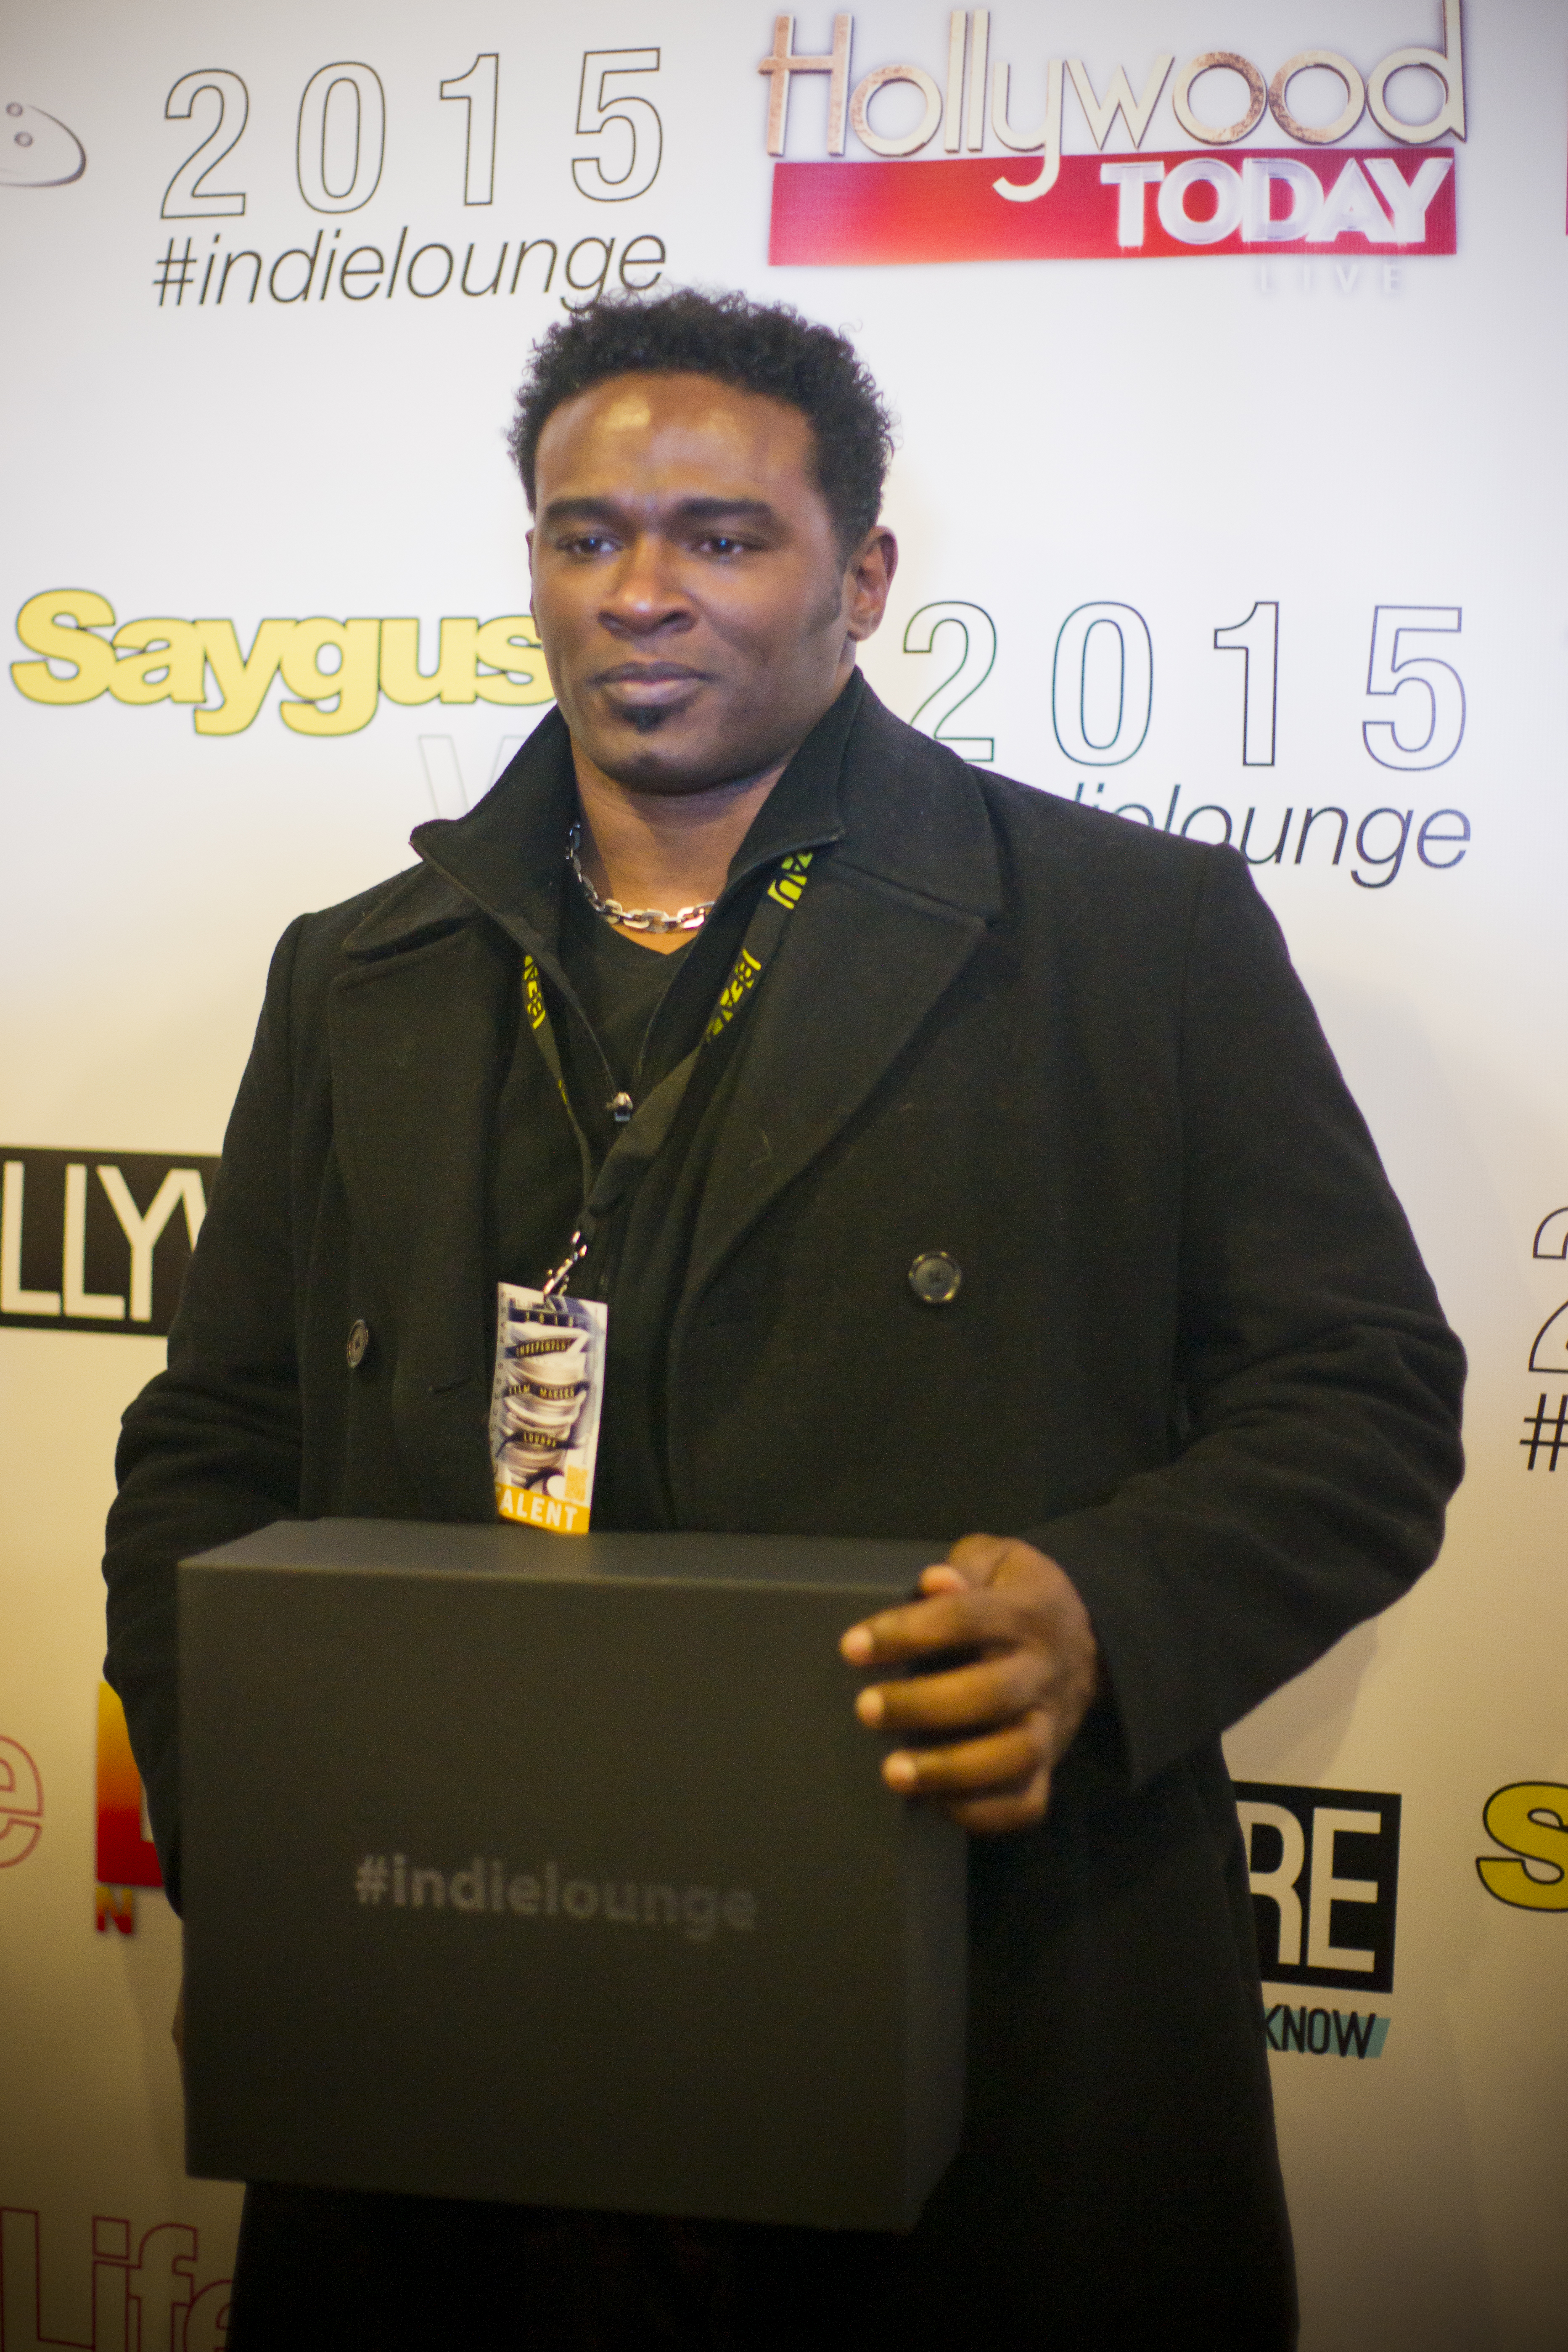 Sundance Film Festival 2015 Guest of the Indie Lounge.